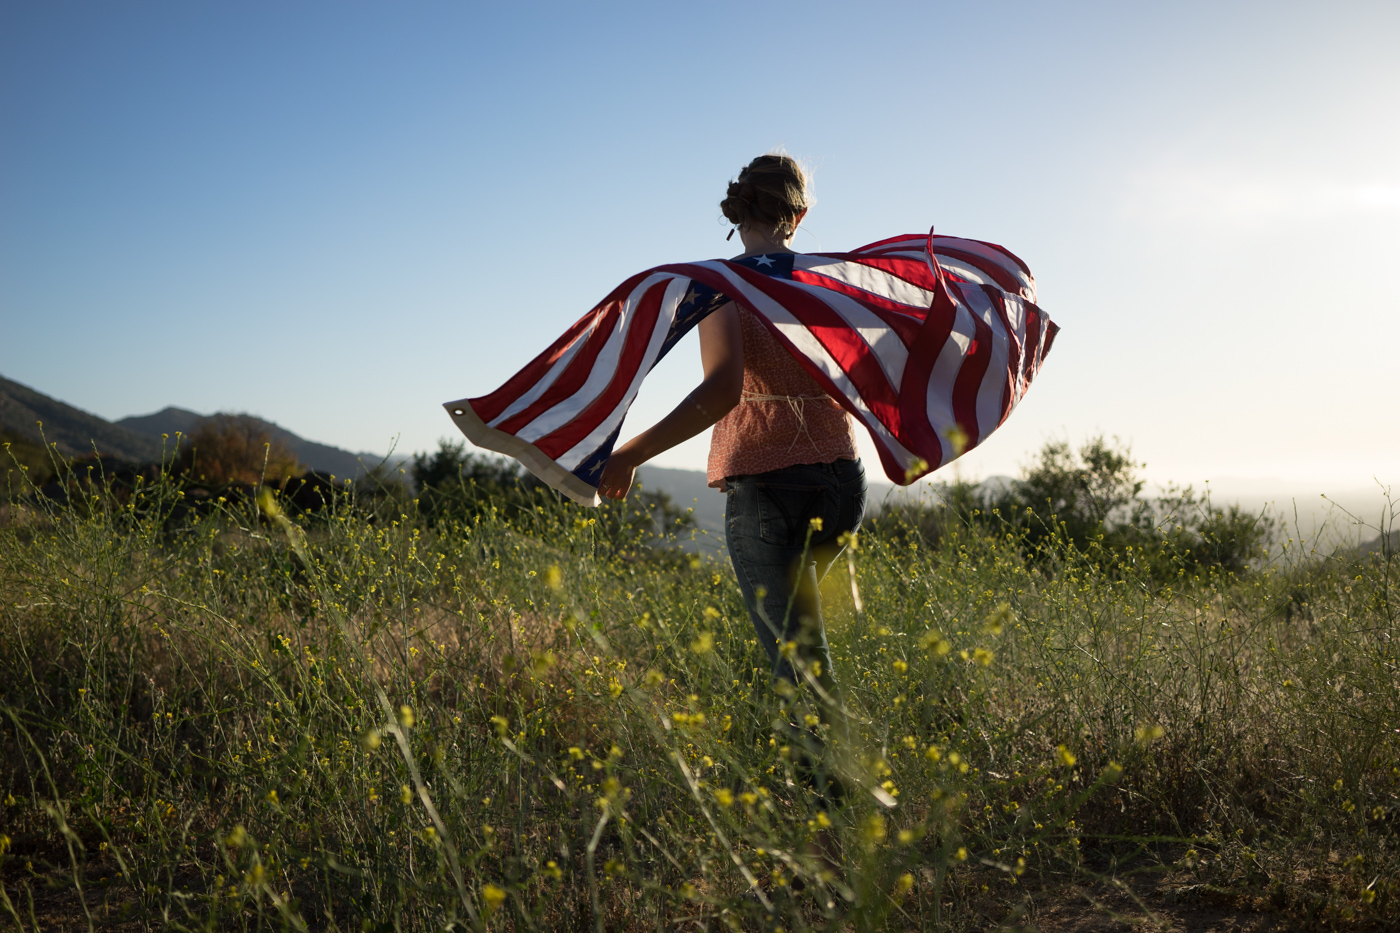 American woman with waving flag portrait in grassy mountain landscape at sunset